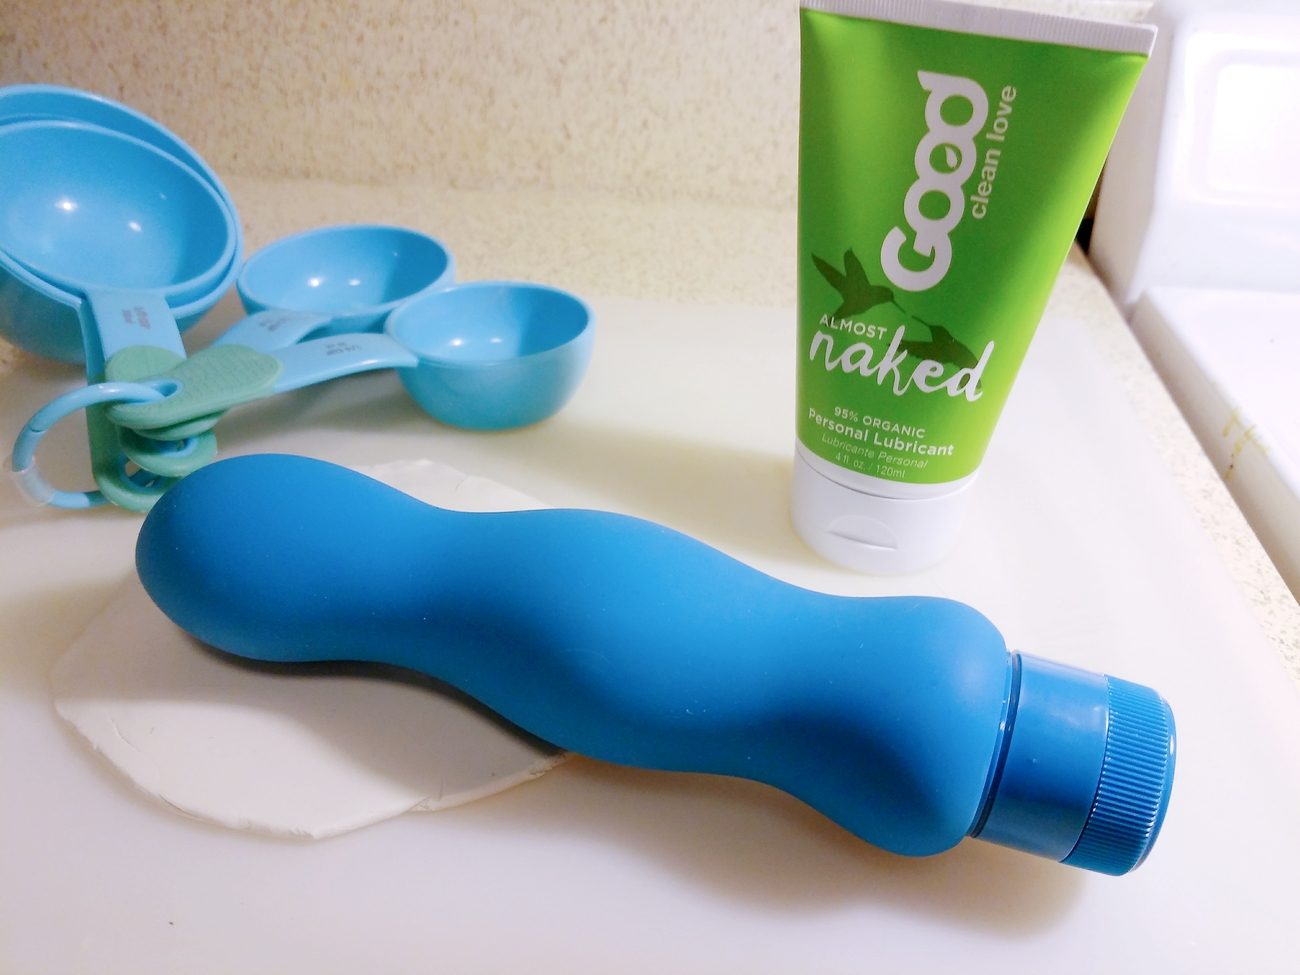 The girthy, voluptuous Sinclair Inspire vibrator comes in a gorgeous cyan blue